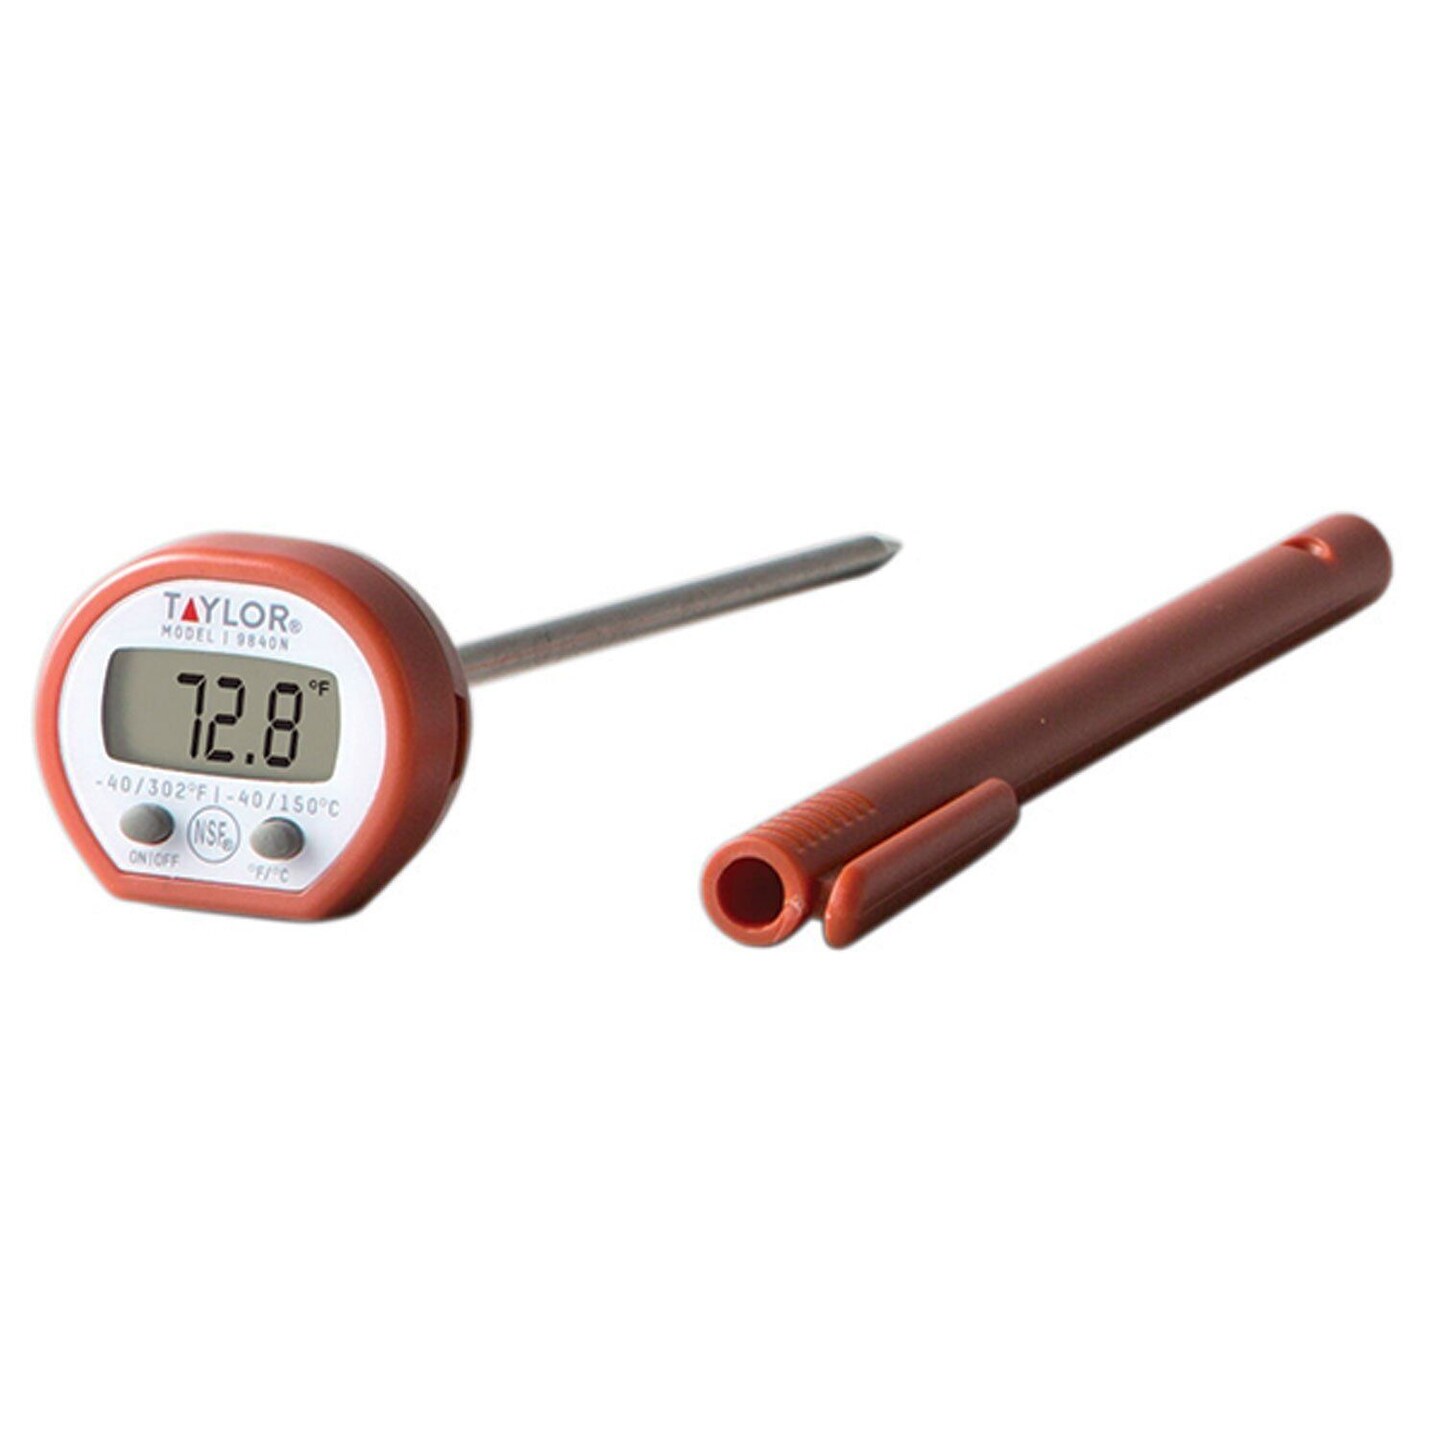 TAYLOR Digital Instant Read Pocket Thermometer